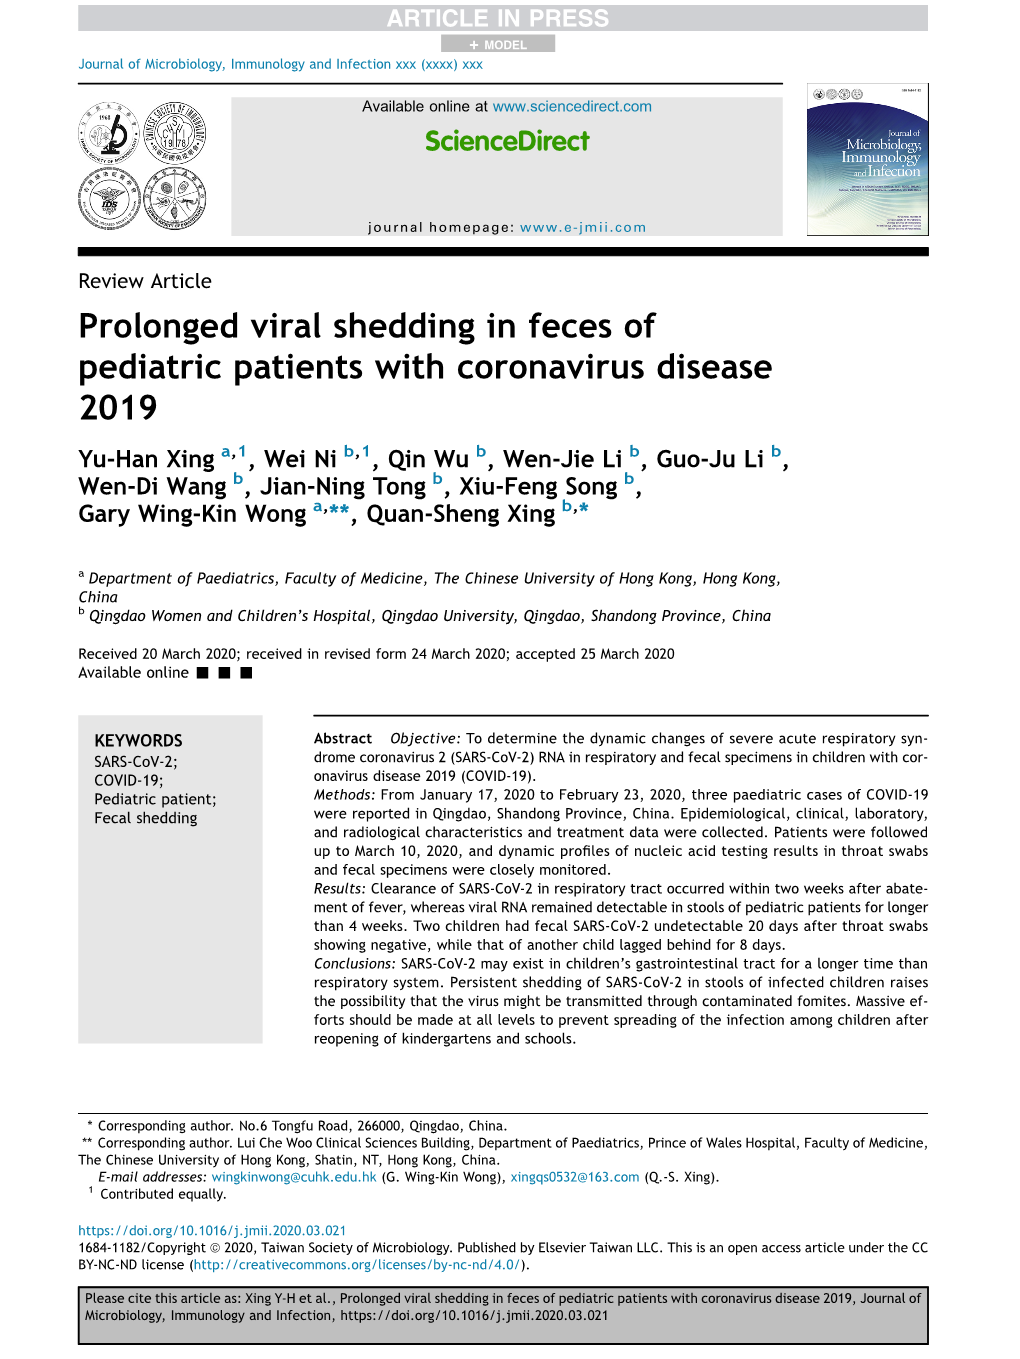 Prolonged Viral Shedding in Feces of Pediatric Patients with Coronavirus